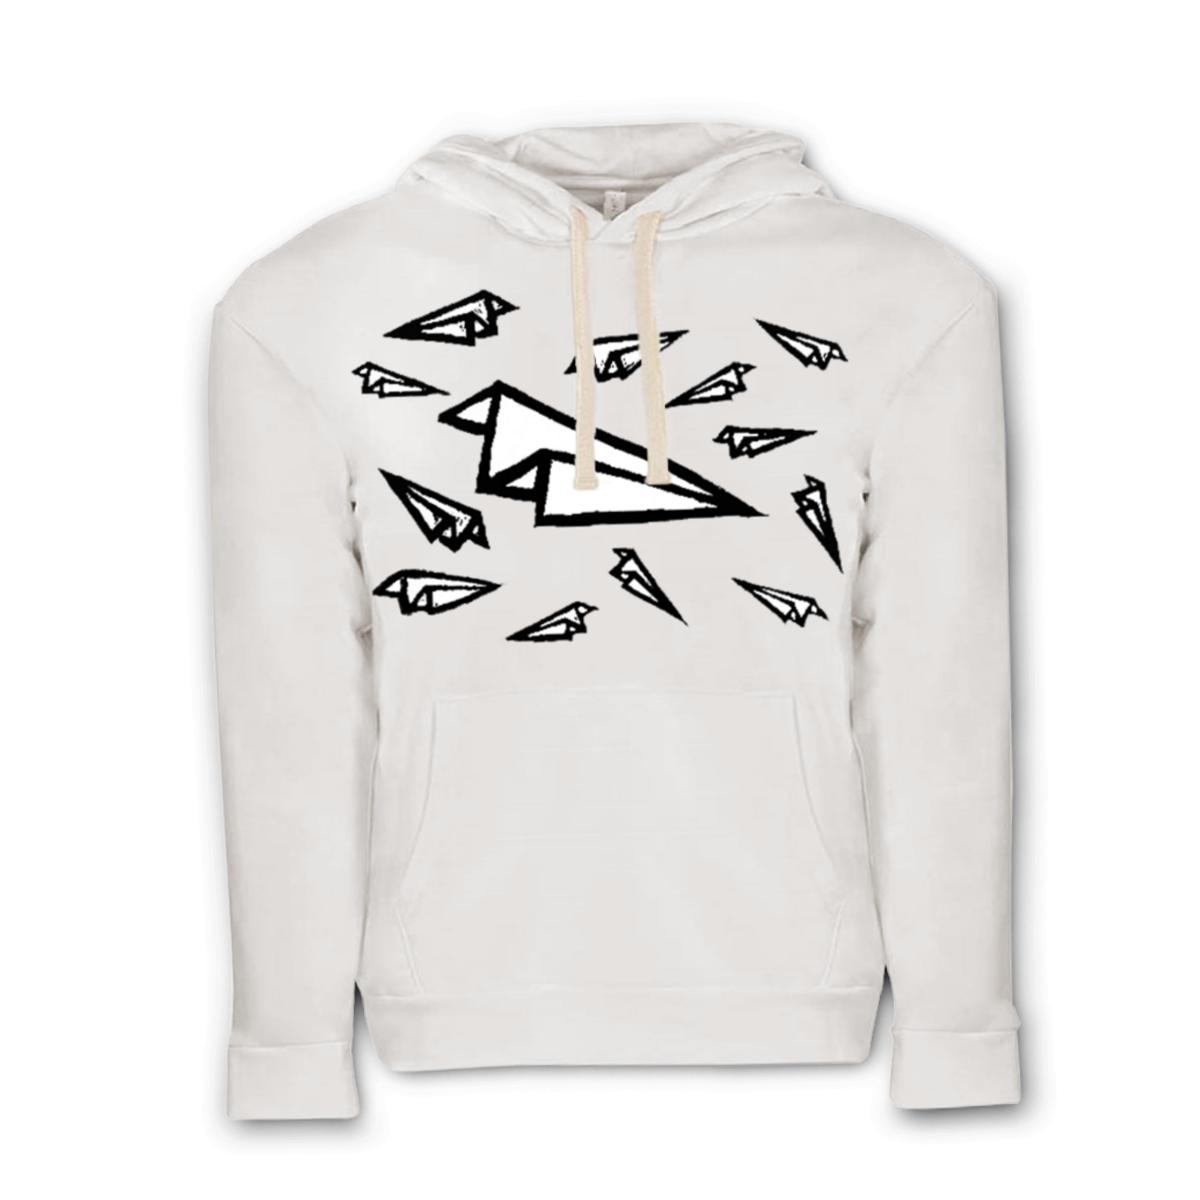 Airplane Frenzy Unisex Pullover Hoodie Large white